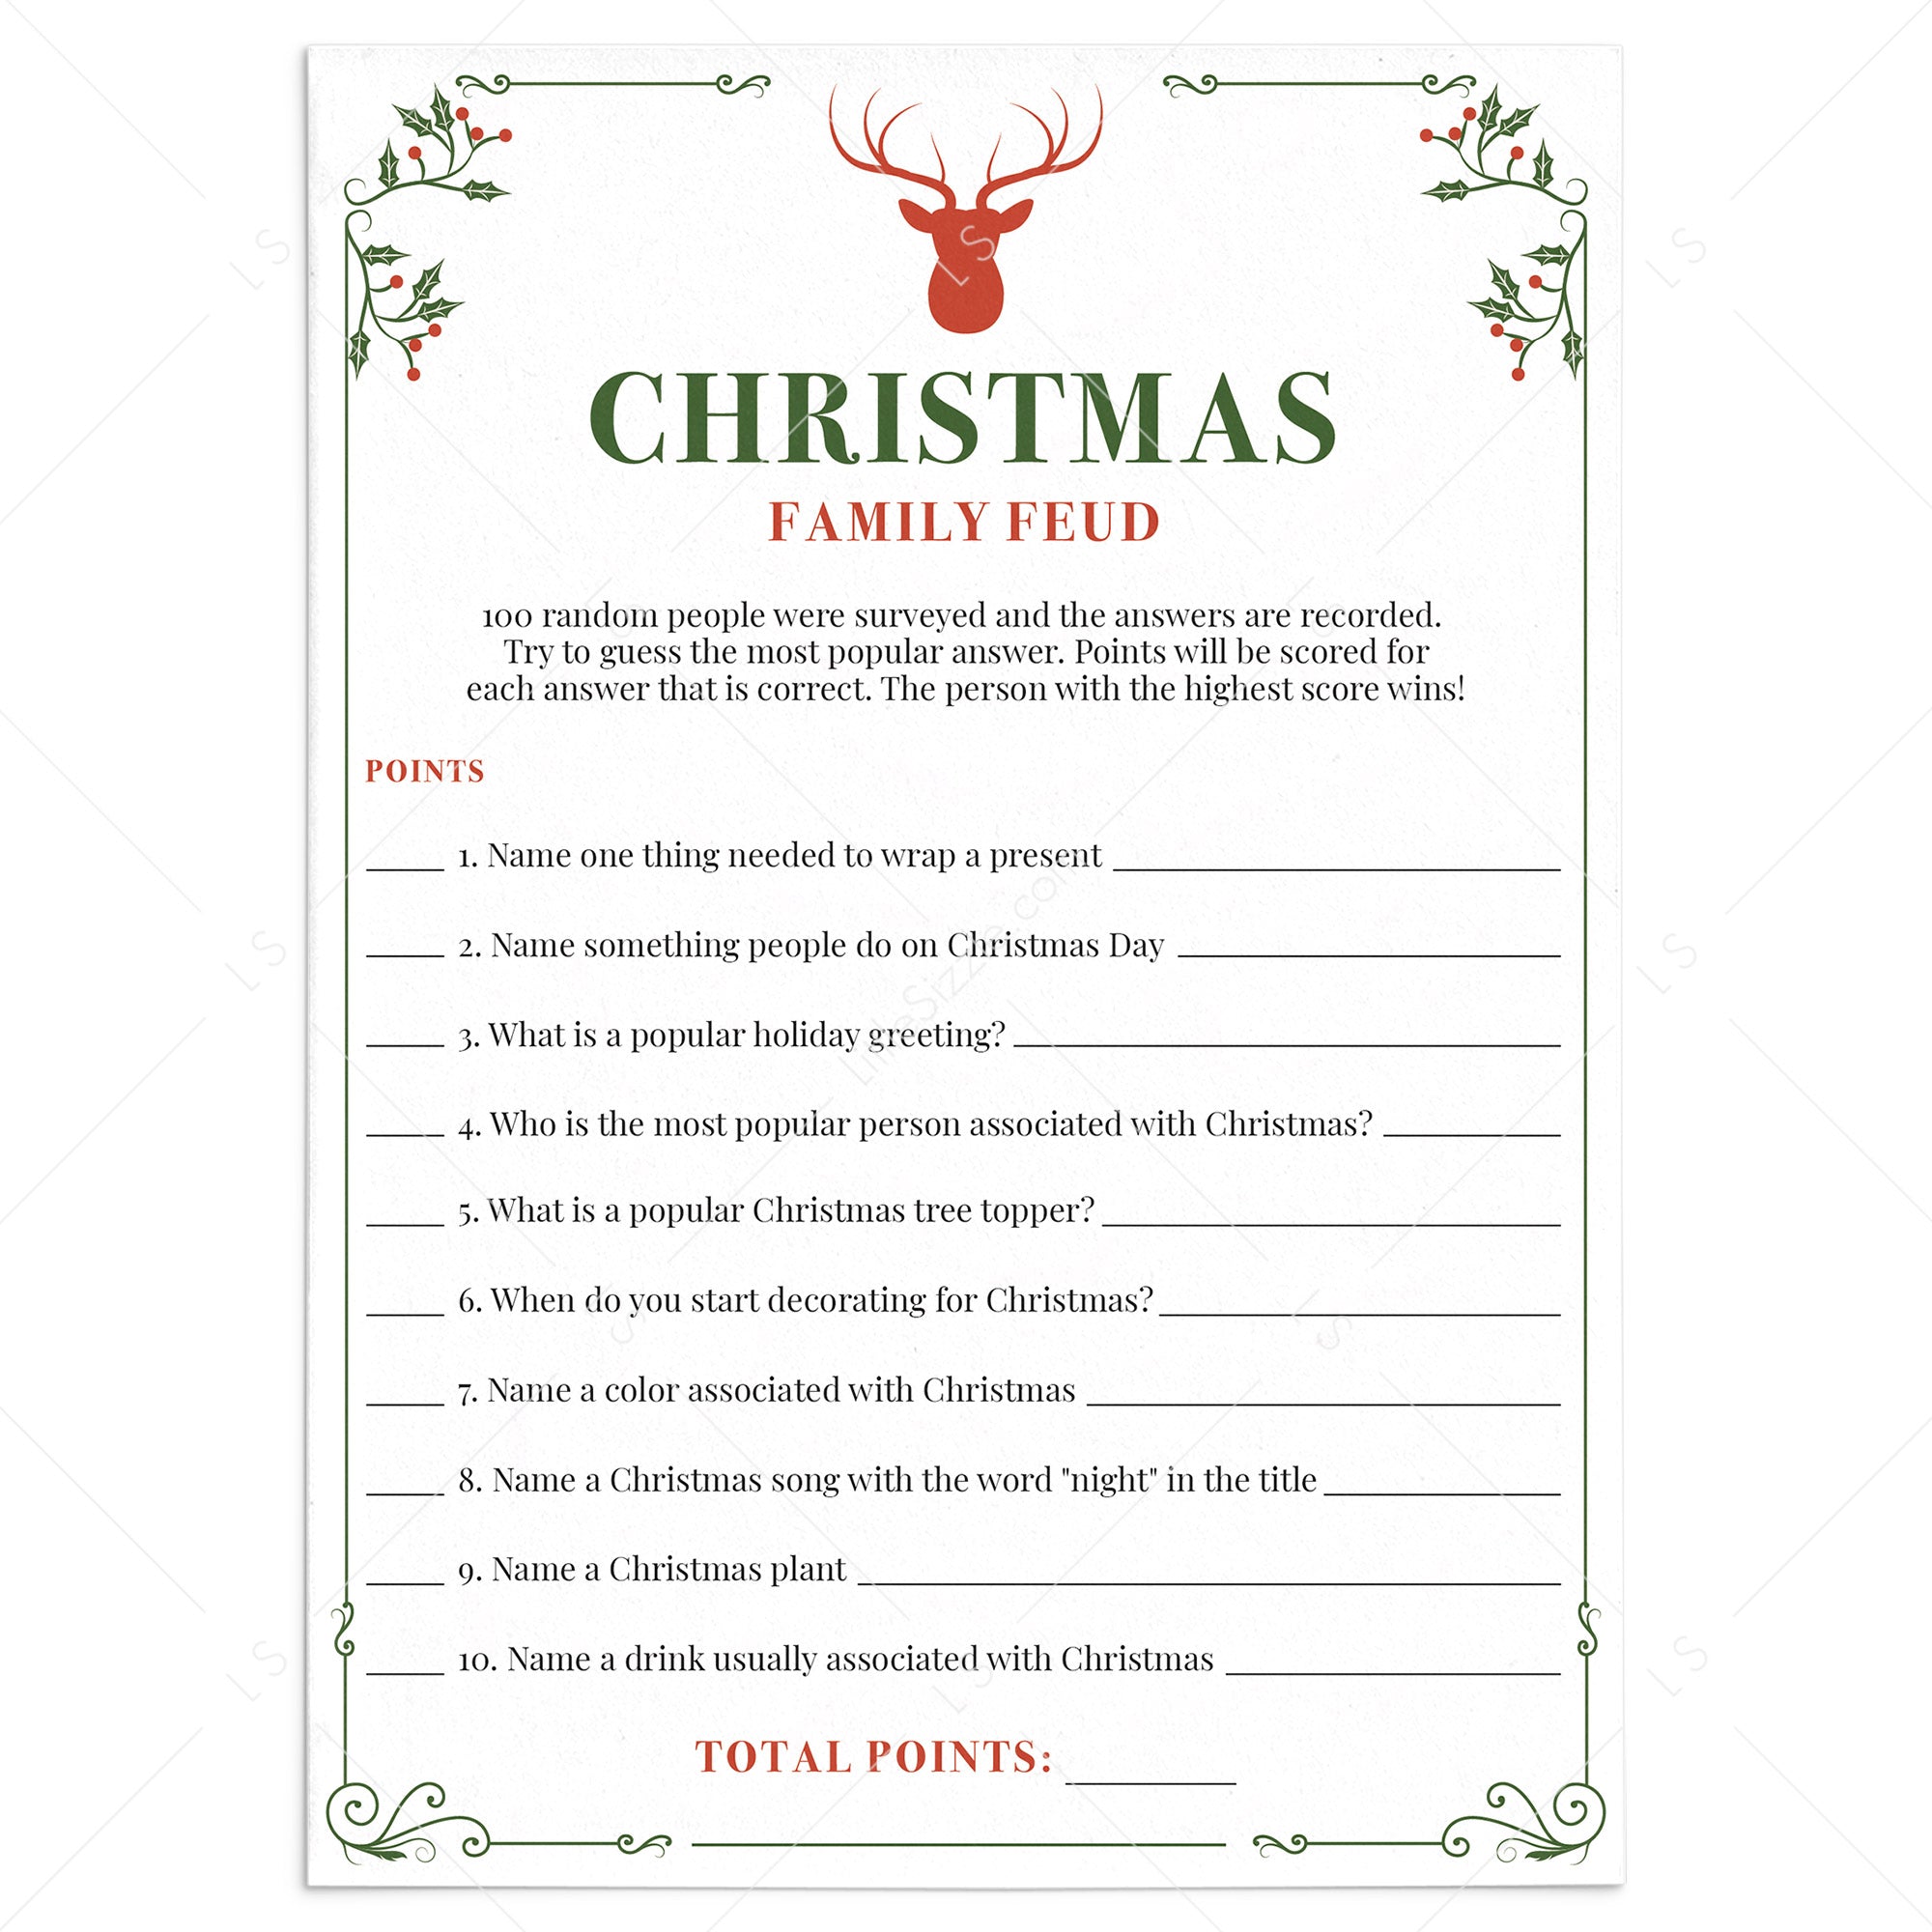 christmas-family-feud-game-questions-and-answers-printable-littlesizzle